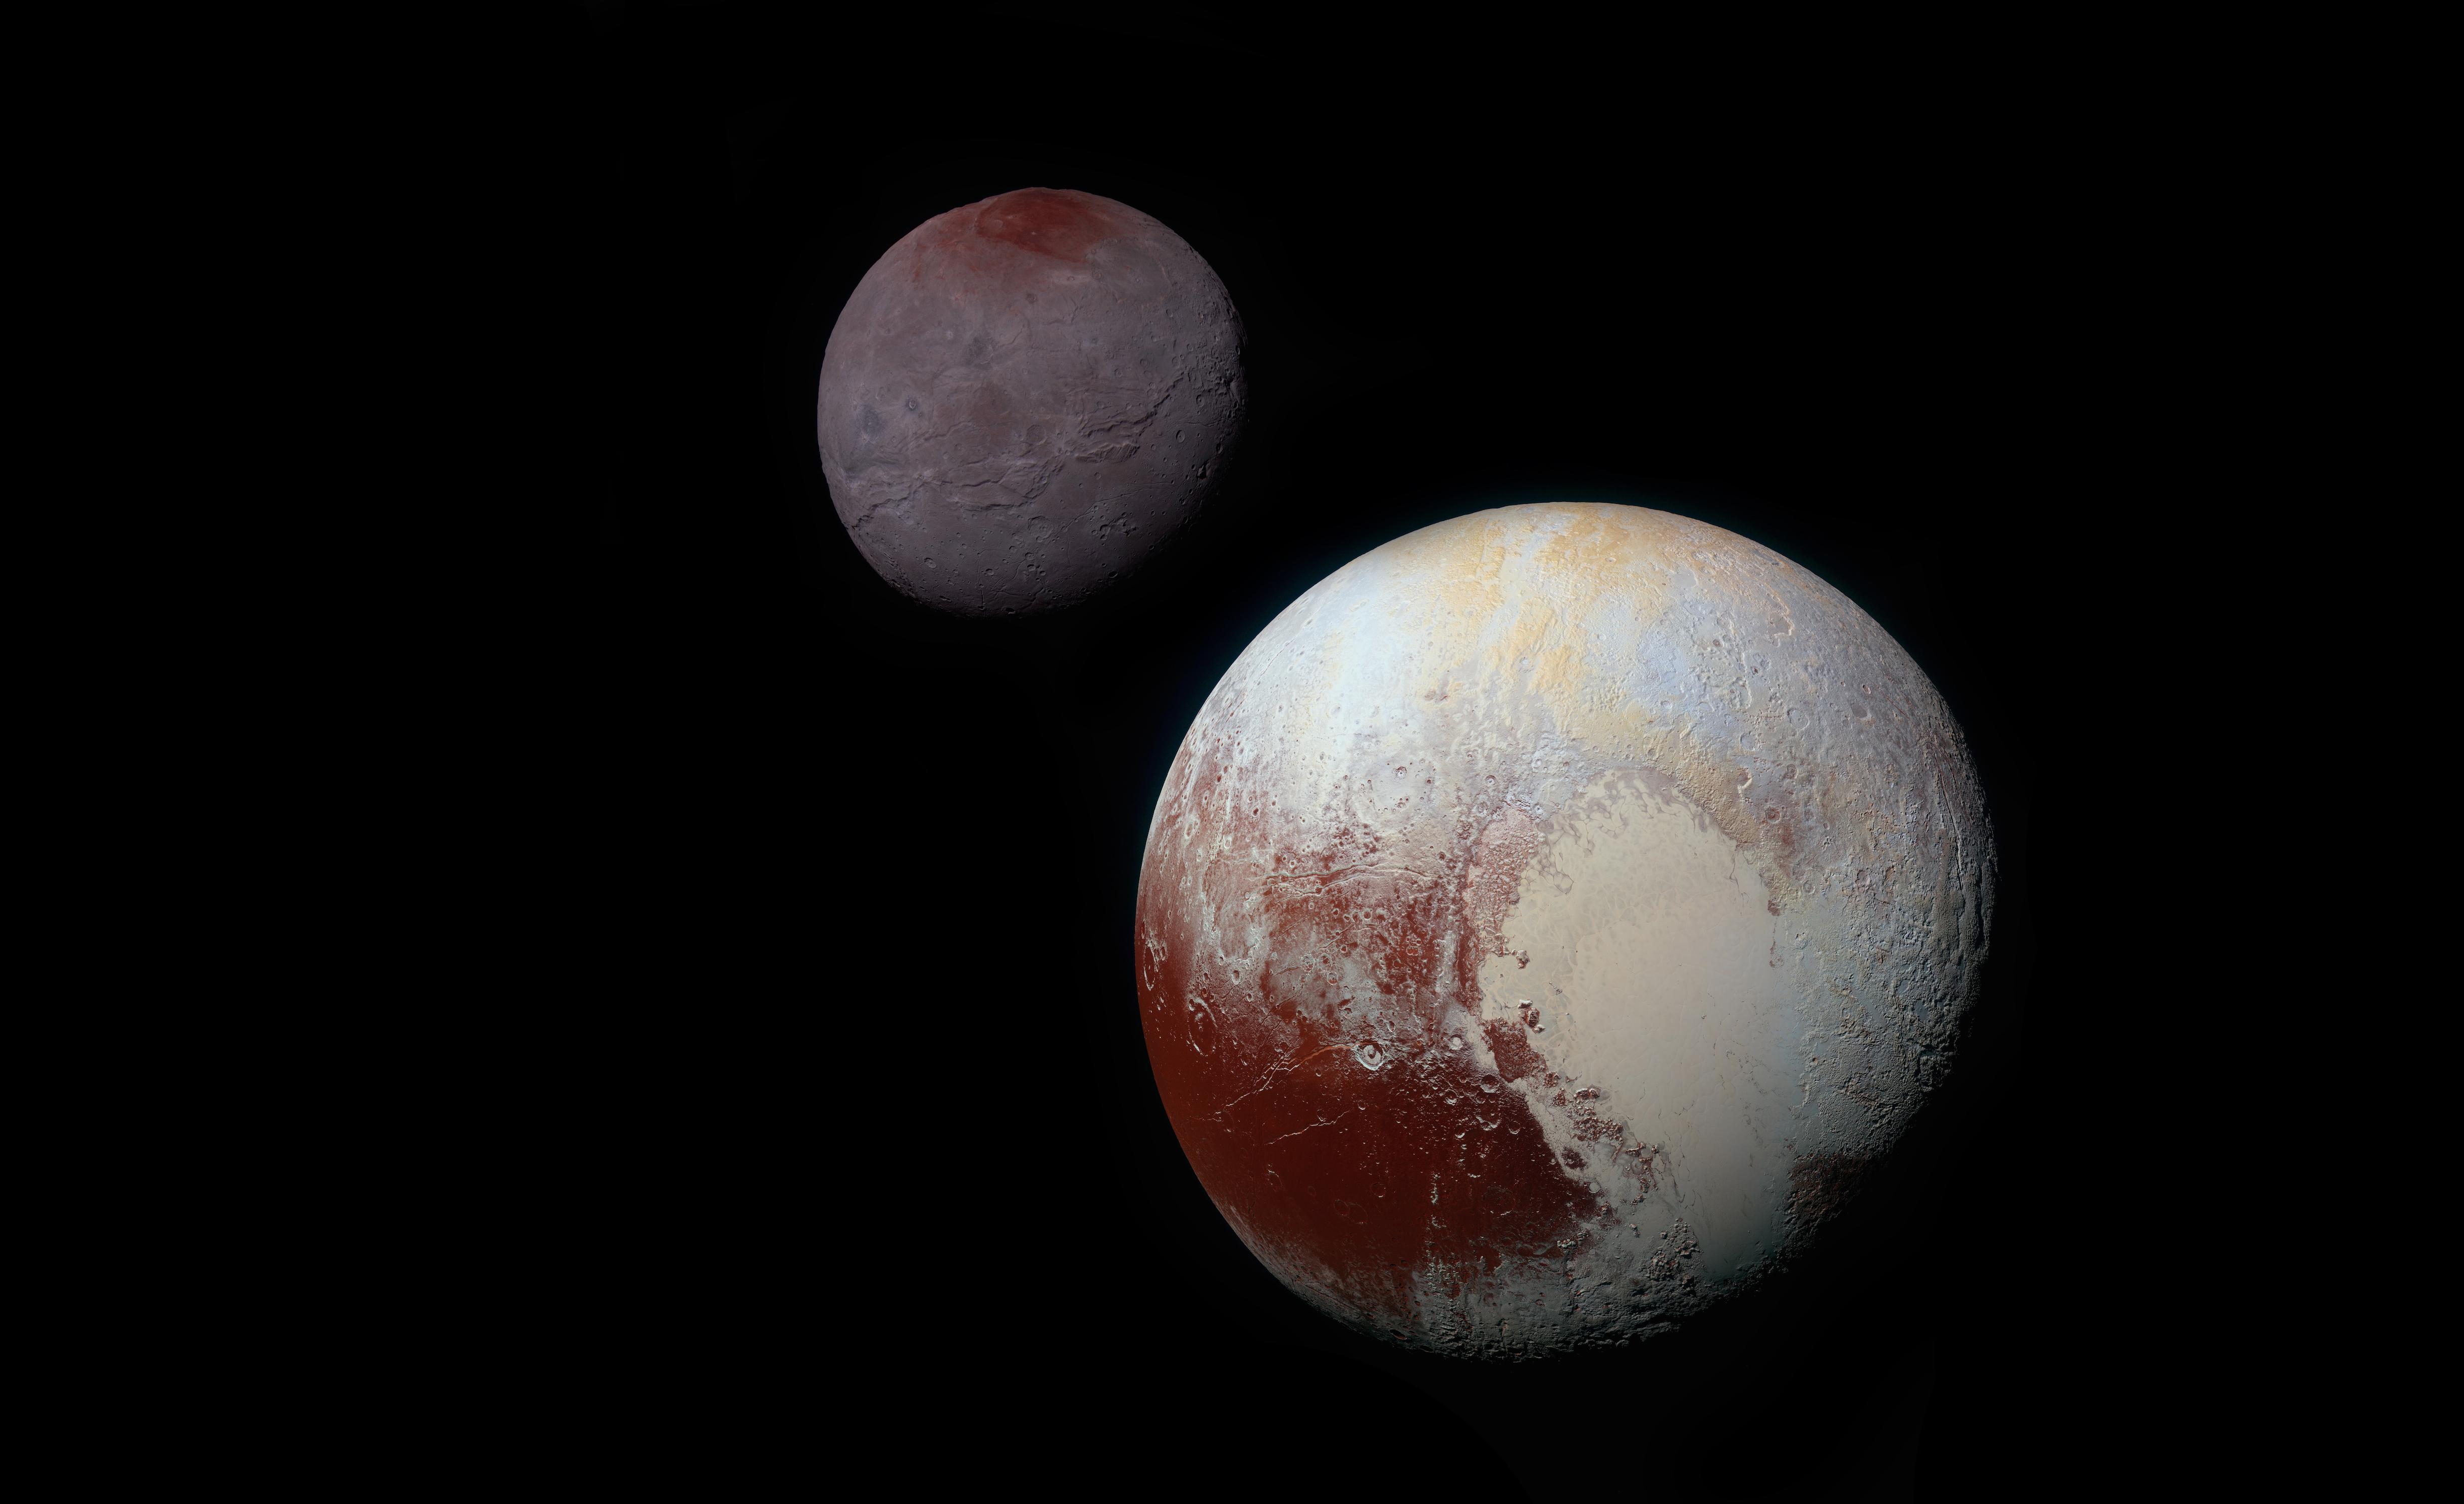 Pluto 4K wallpaper for your desktop or mobile screen free and easy to download